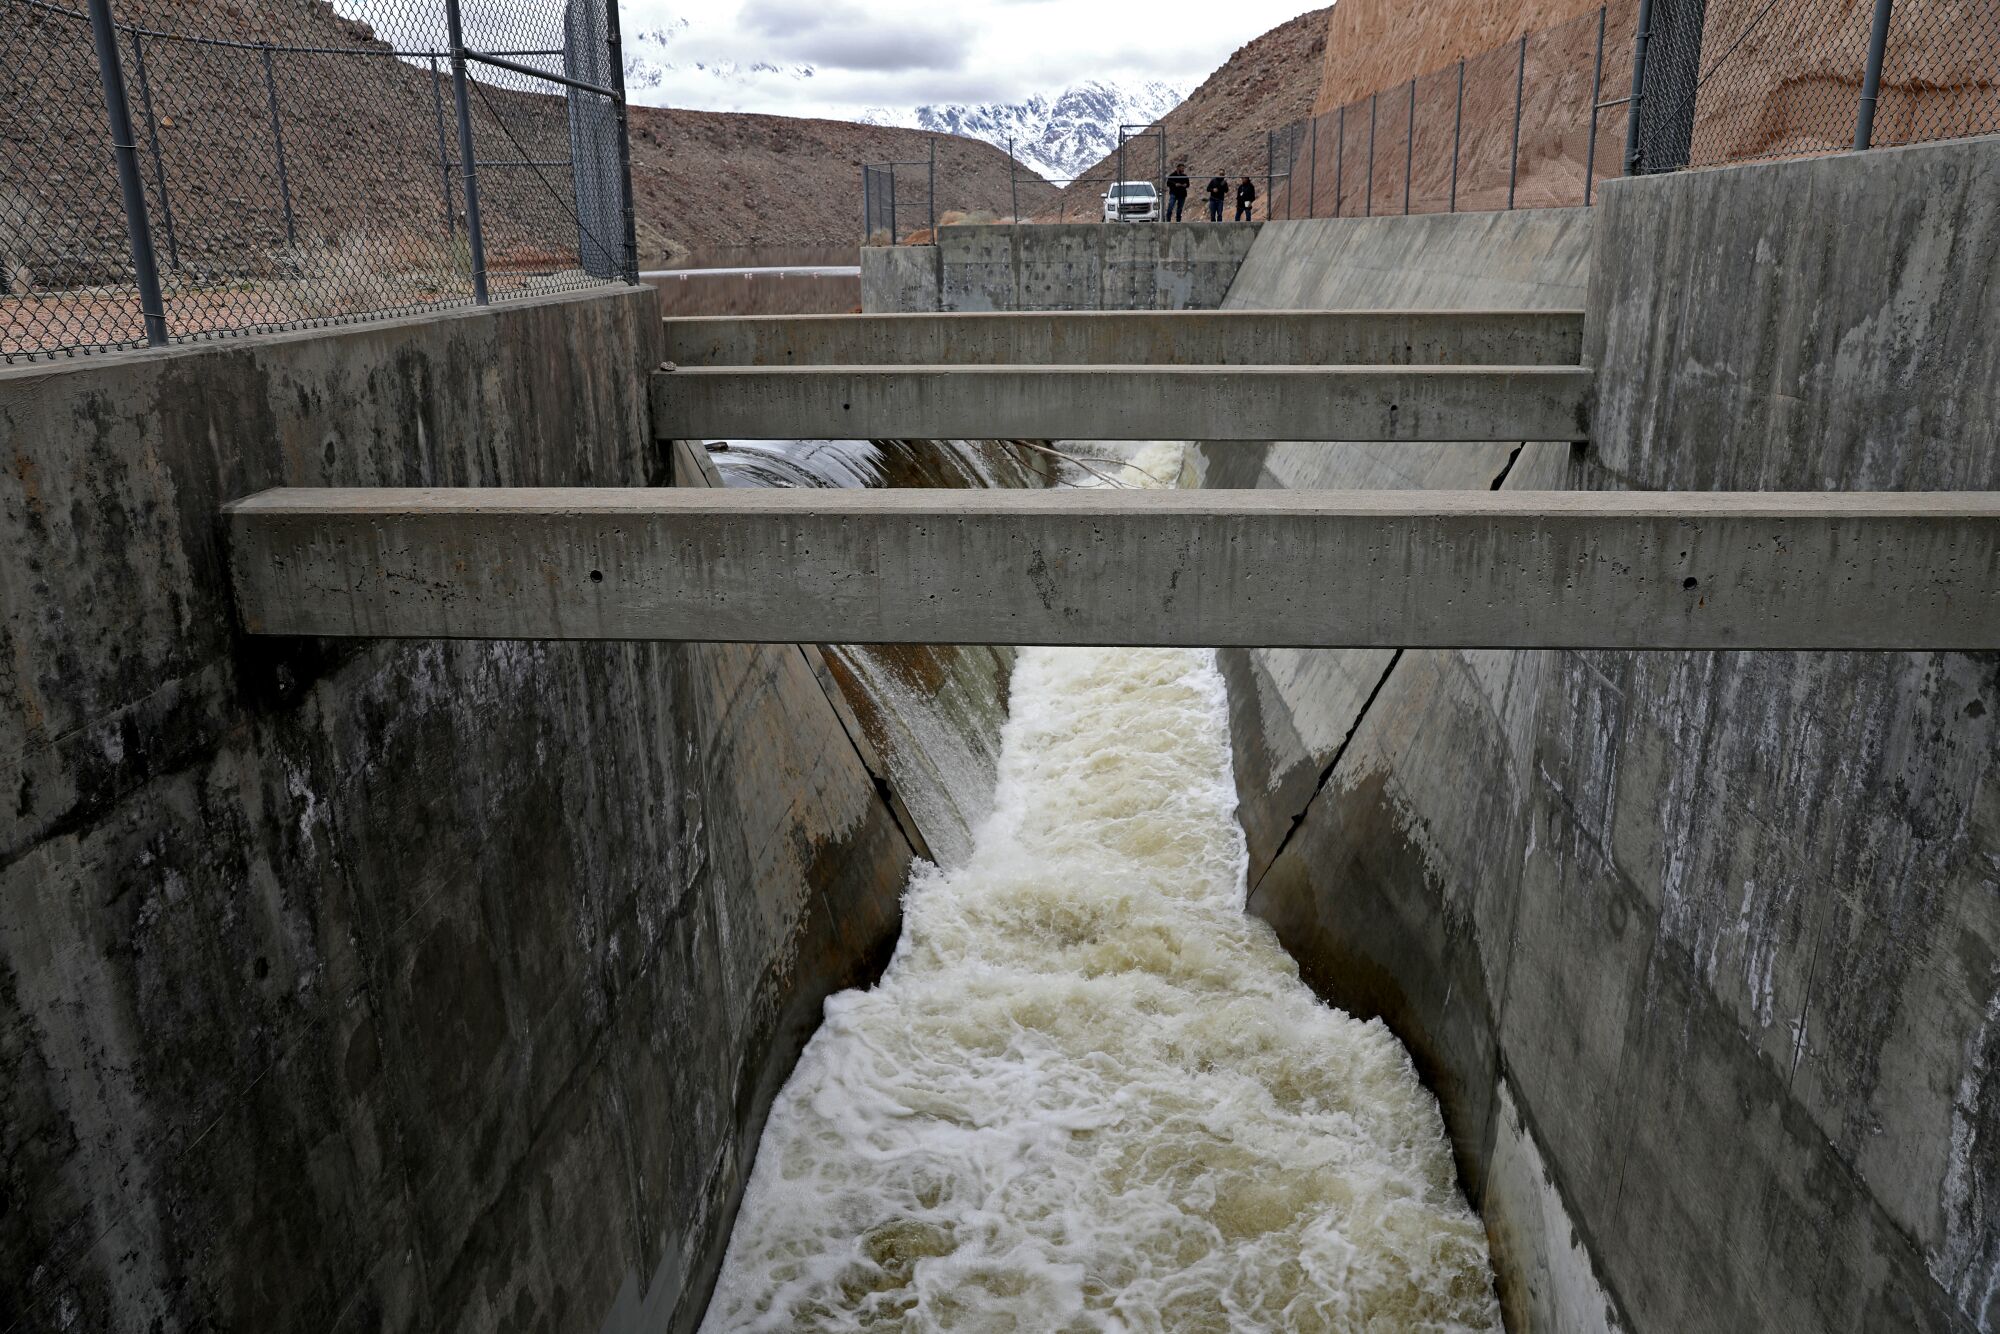 Water being released from the Pleasant Valley Reservoir into the Pleasant Valley Spillway